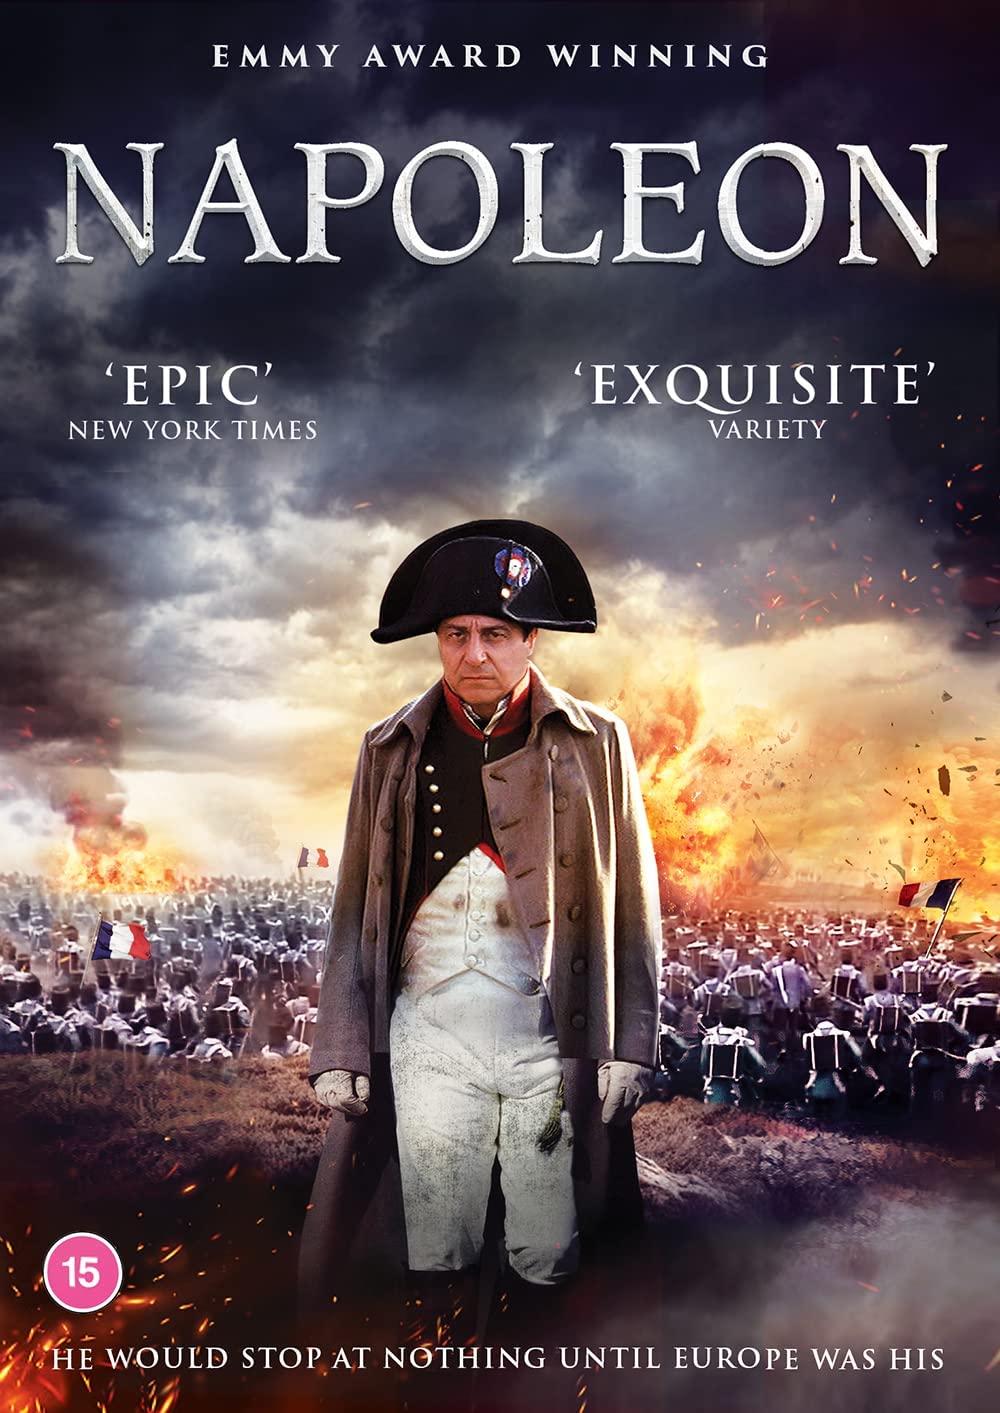 Napoleon - He Would Stop At Nothing Until Europe Was His - Emmy Award Winning - [DVD]